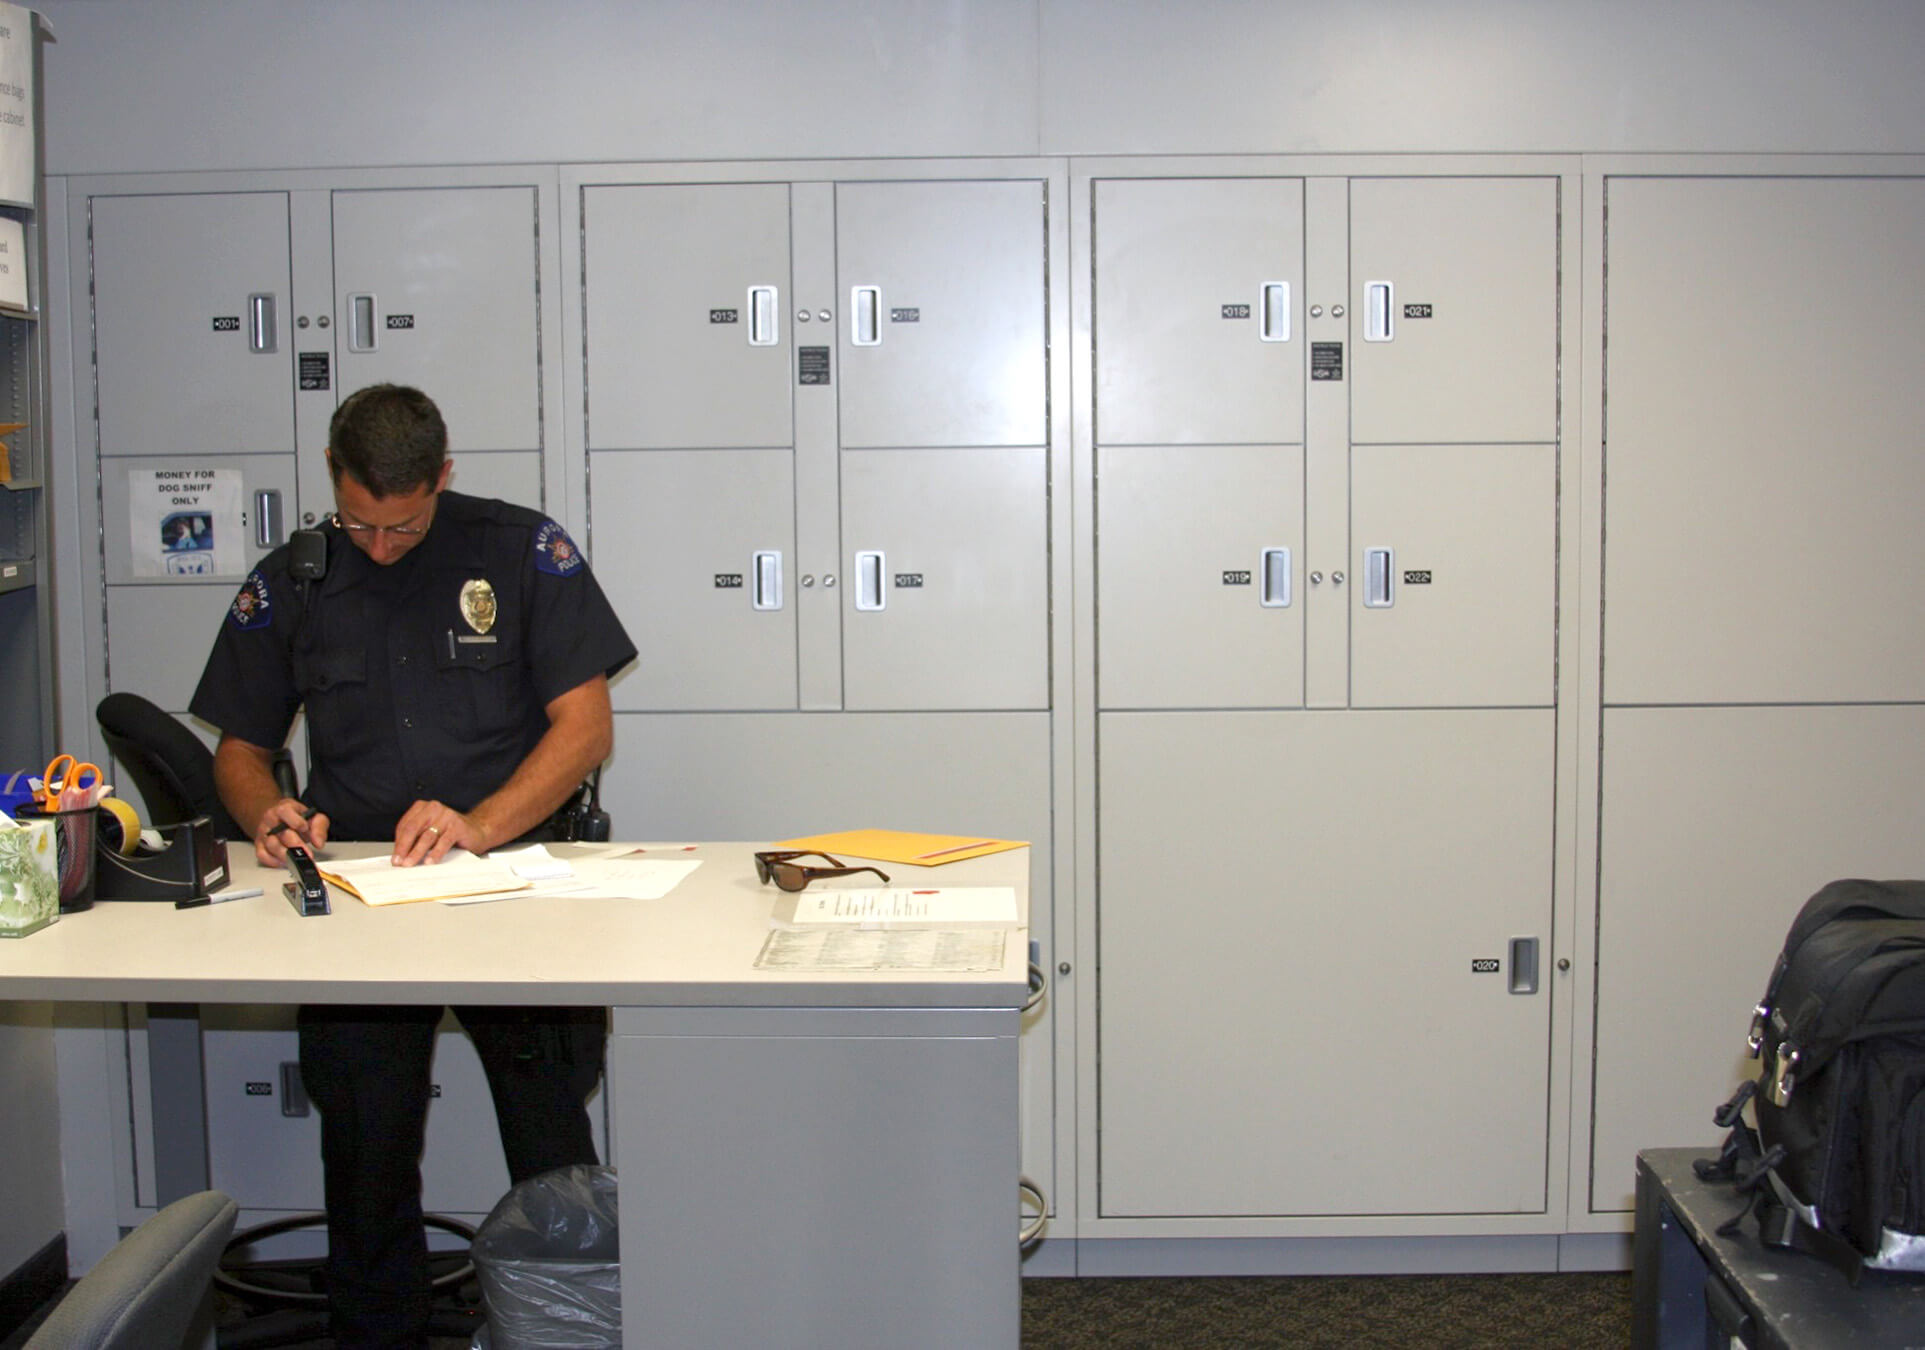 Evidence Management System with Secure Evidence Storage Lockers